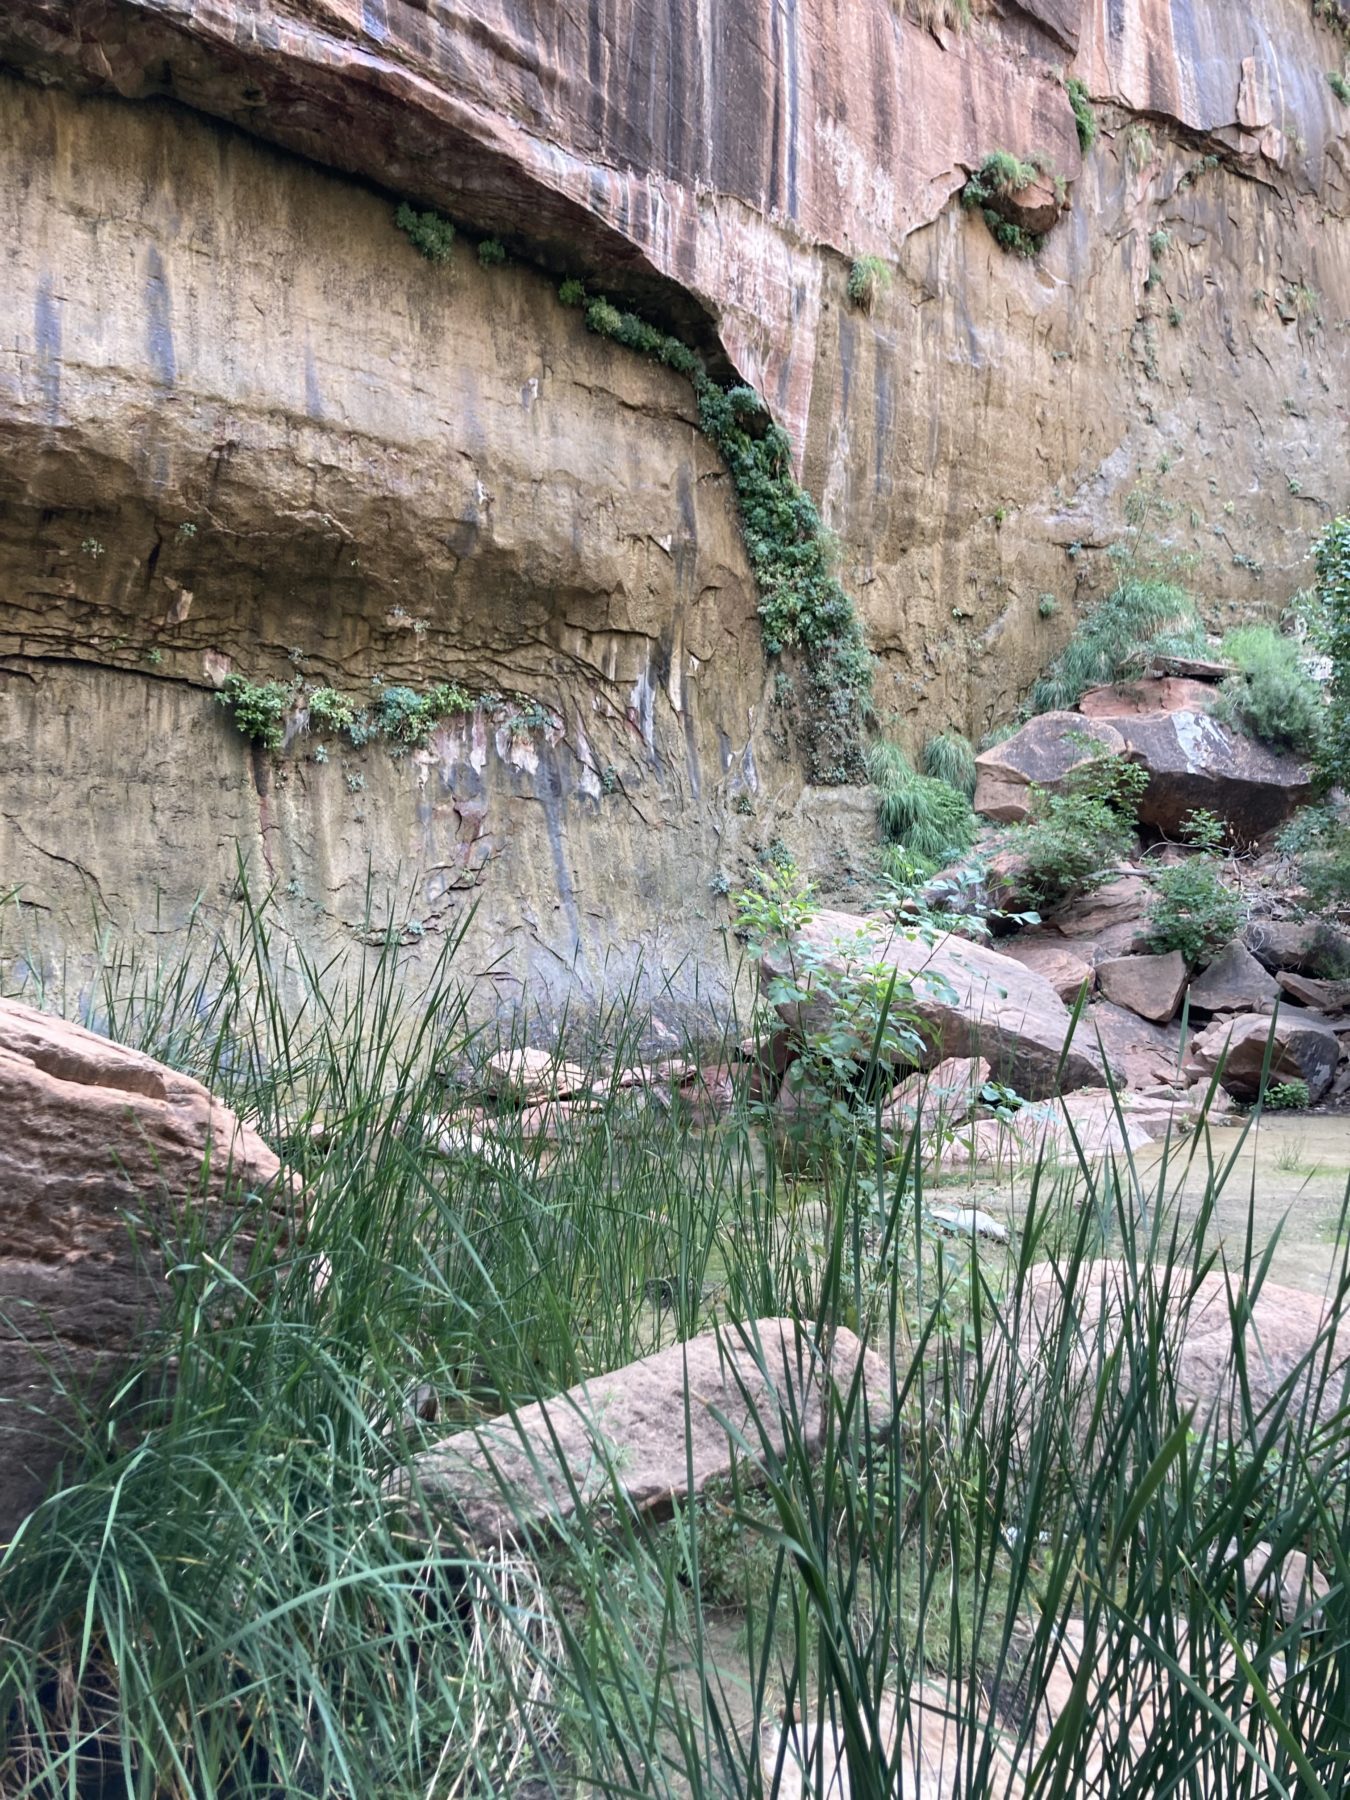 Hiking in Zion - Emerald Pools